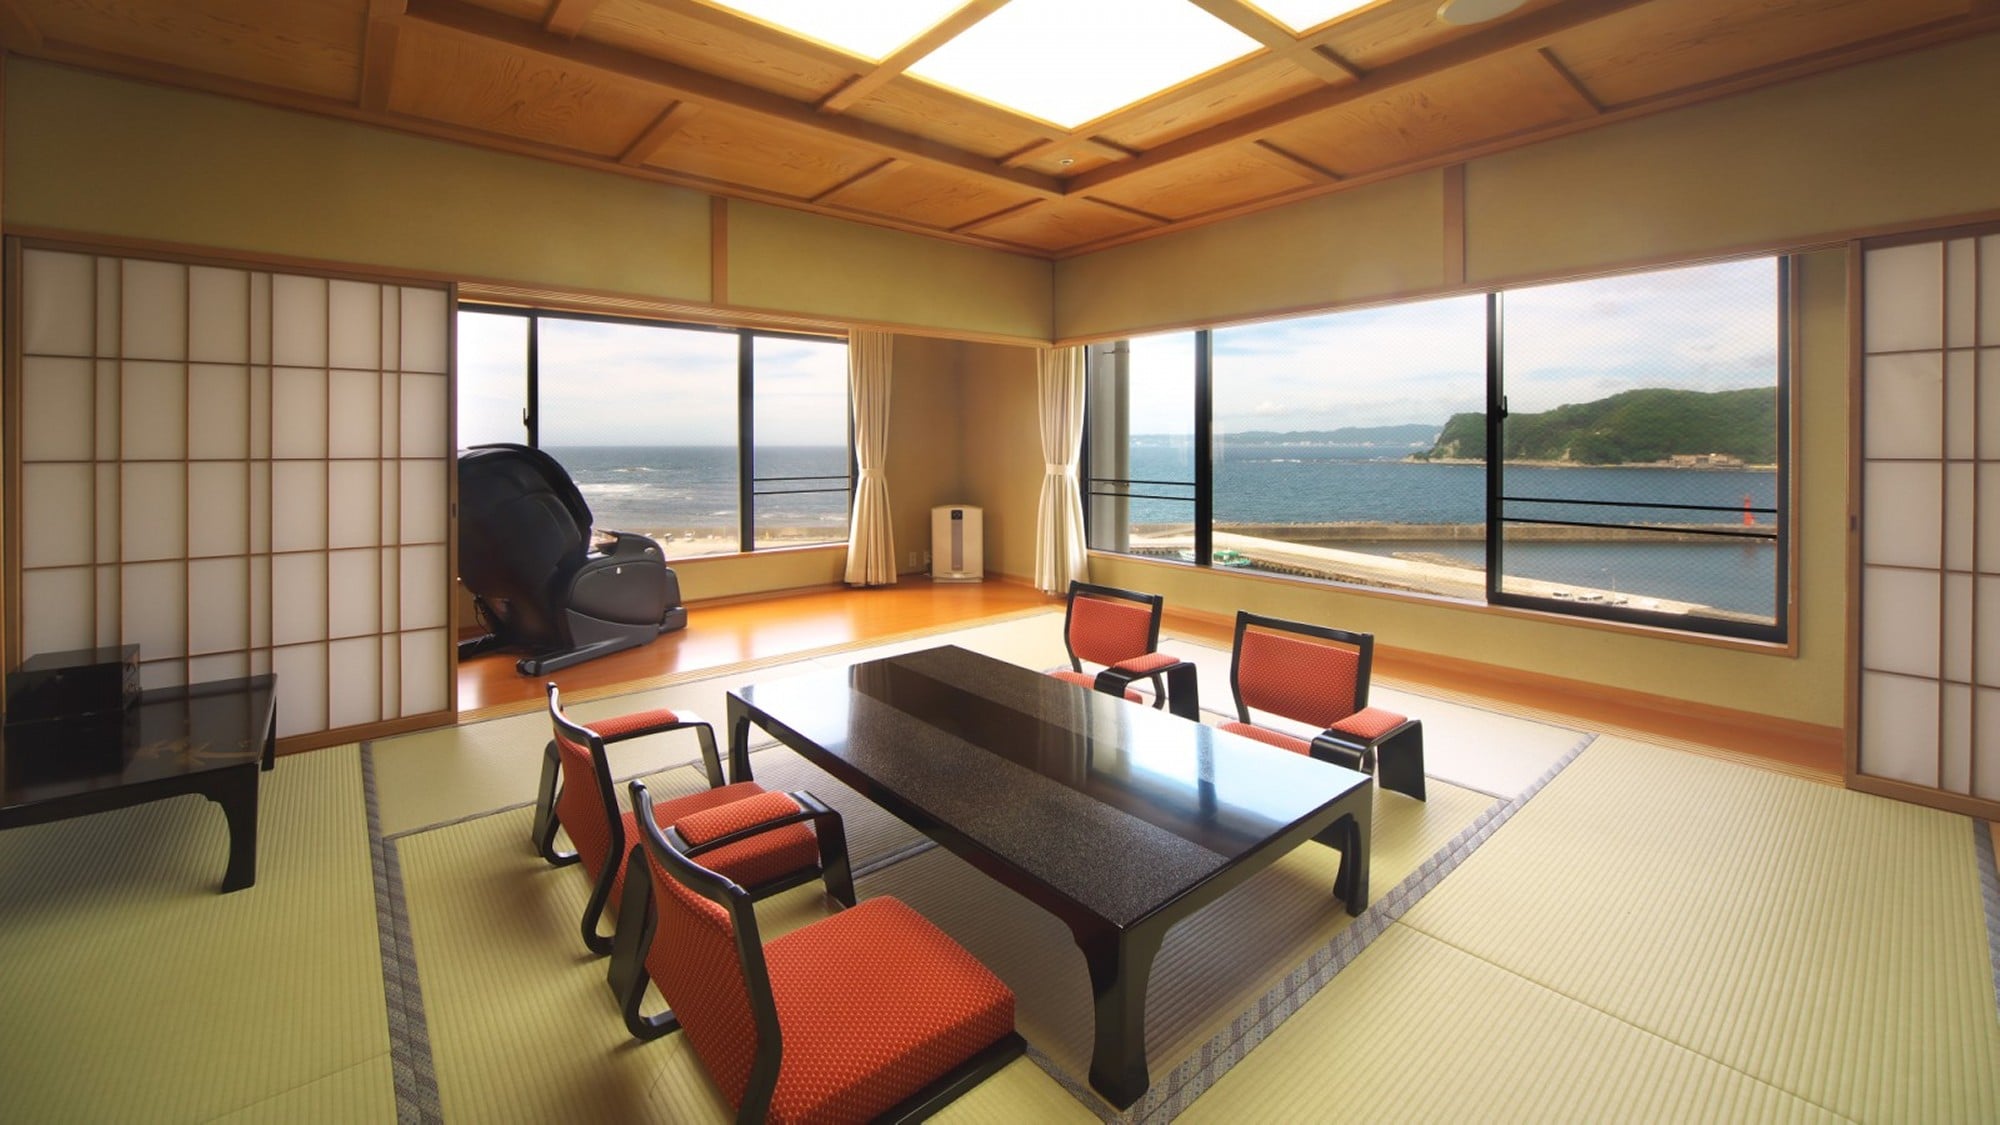 [Kichitei] Excellent view, top floor guest room "Kozuki" <Ocean view> The sunrise and sunset seen from the guest room is a blissful moment.